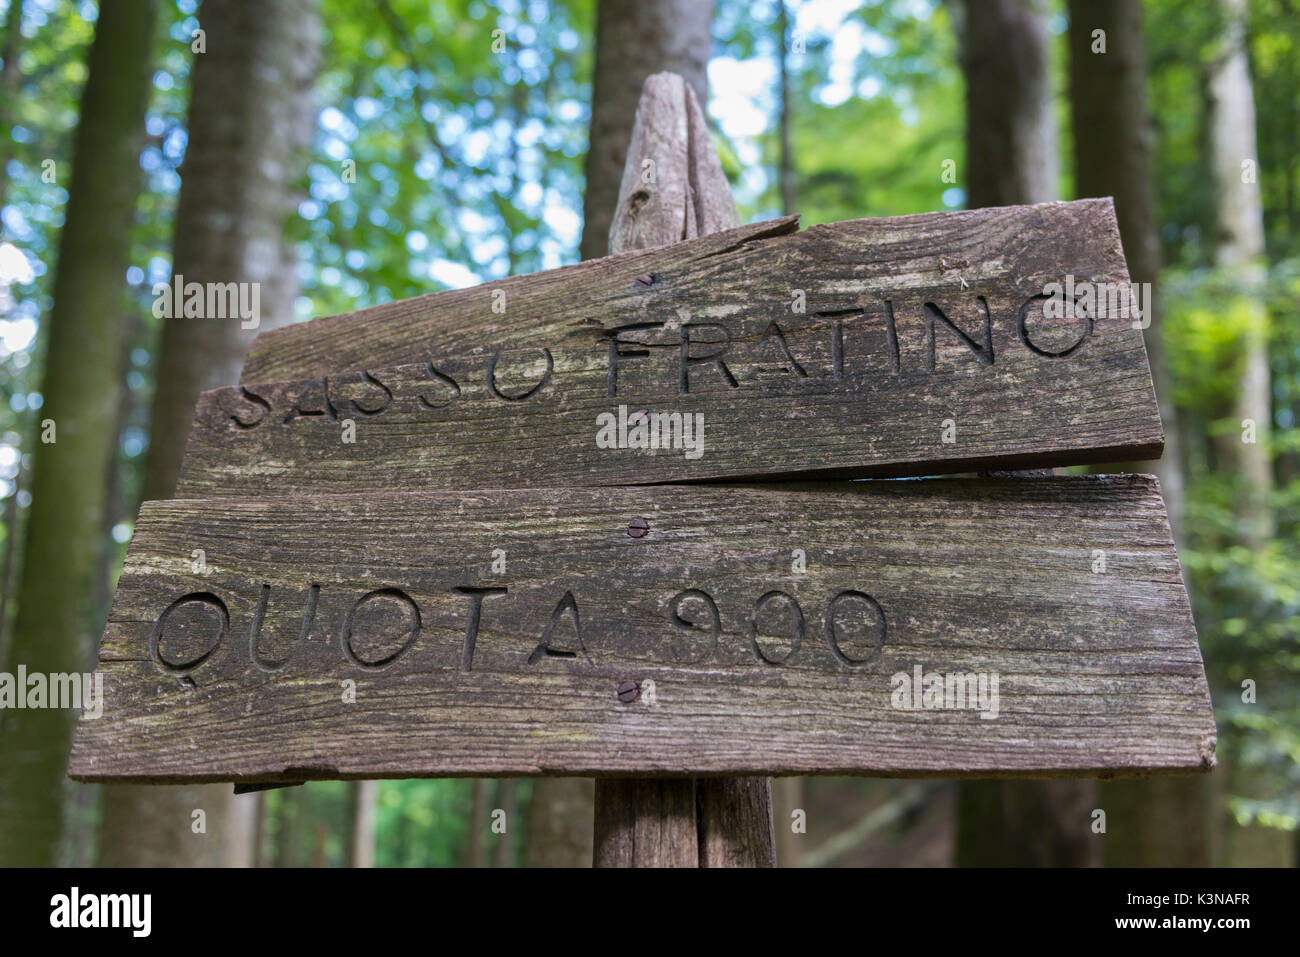 Signboard of Quota 900, the hearth of Sasso Fratino Integral Natural Reserve, Emilia Romagna district, Italy Stock Photo